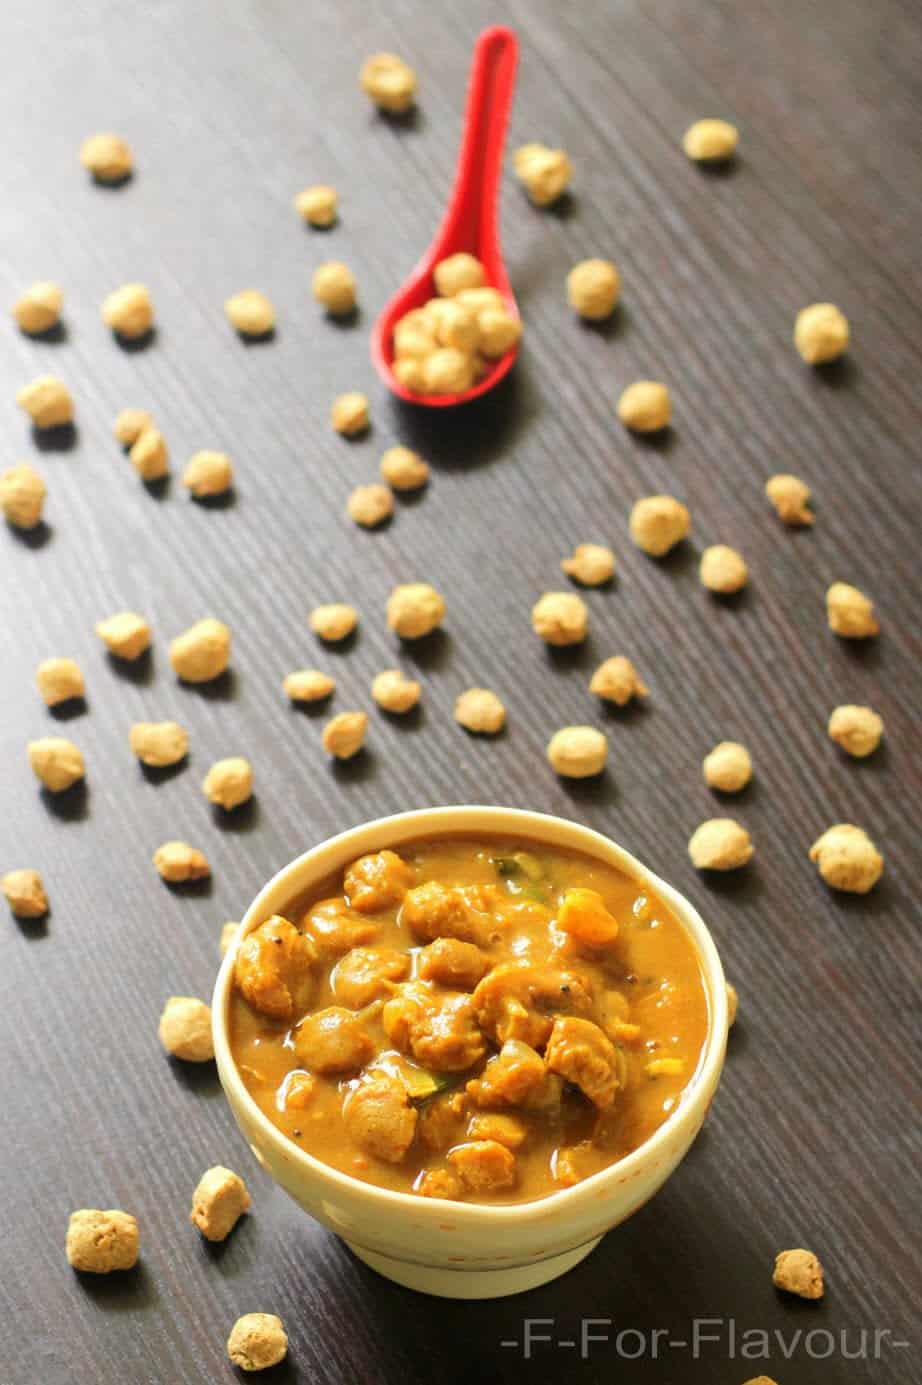 Meal maker curry in a bowl